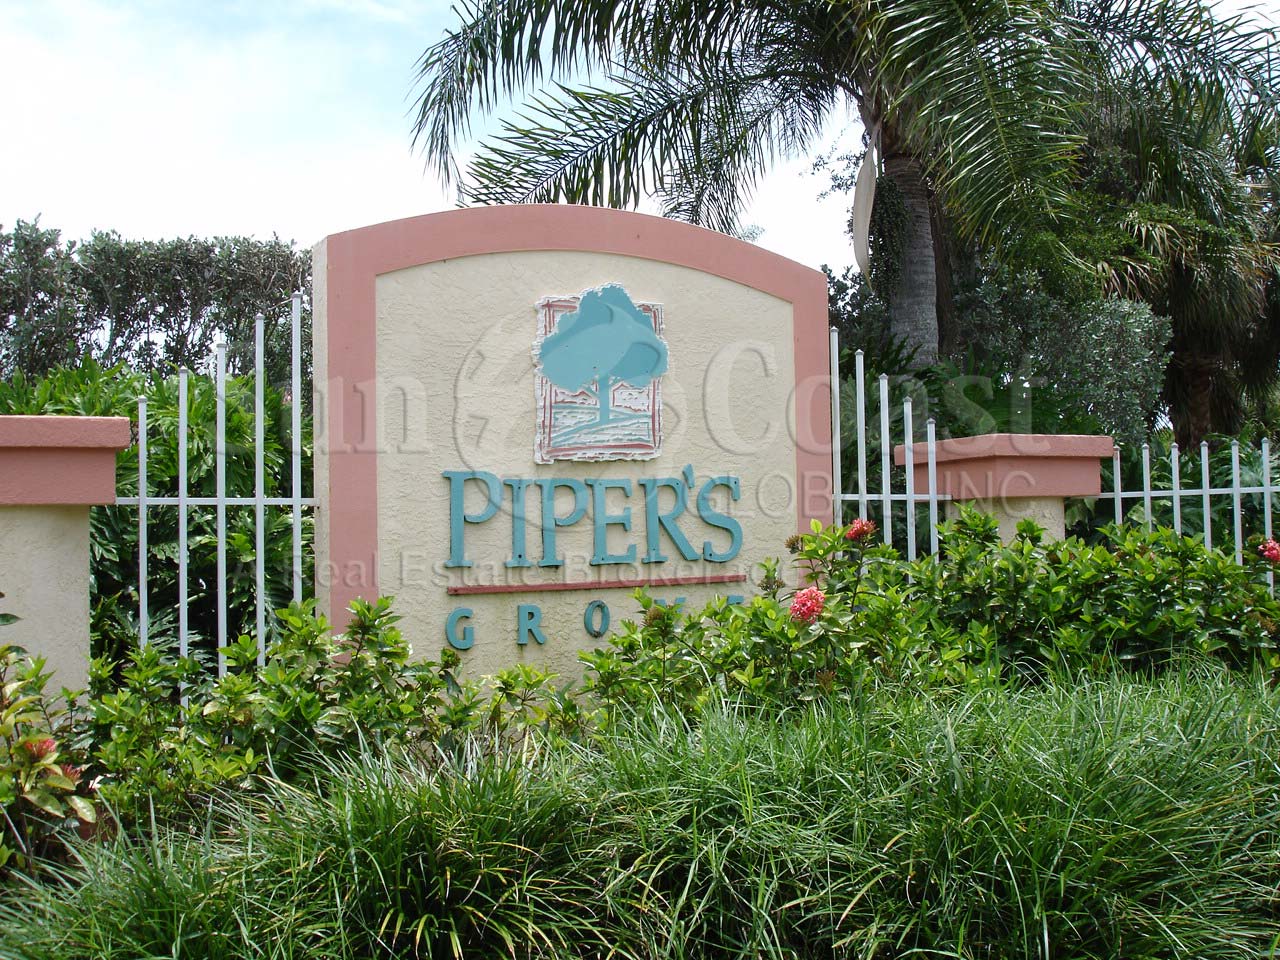 Pipers Grove sign